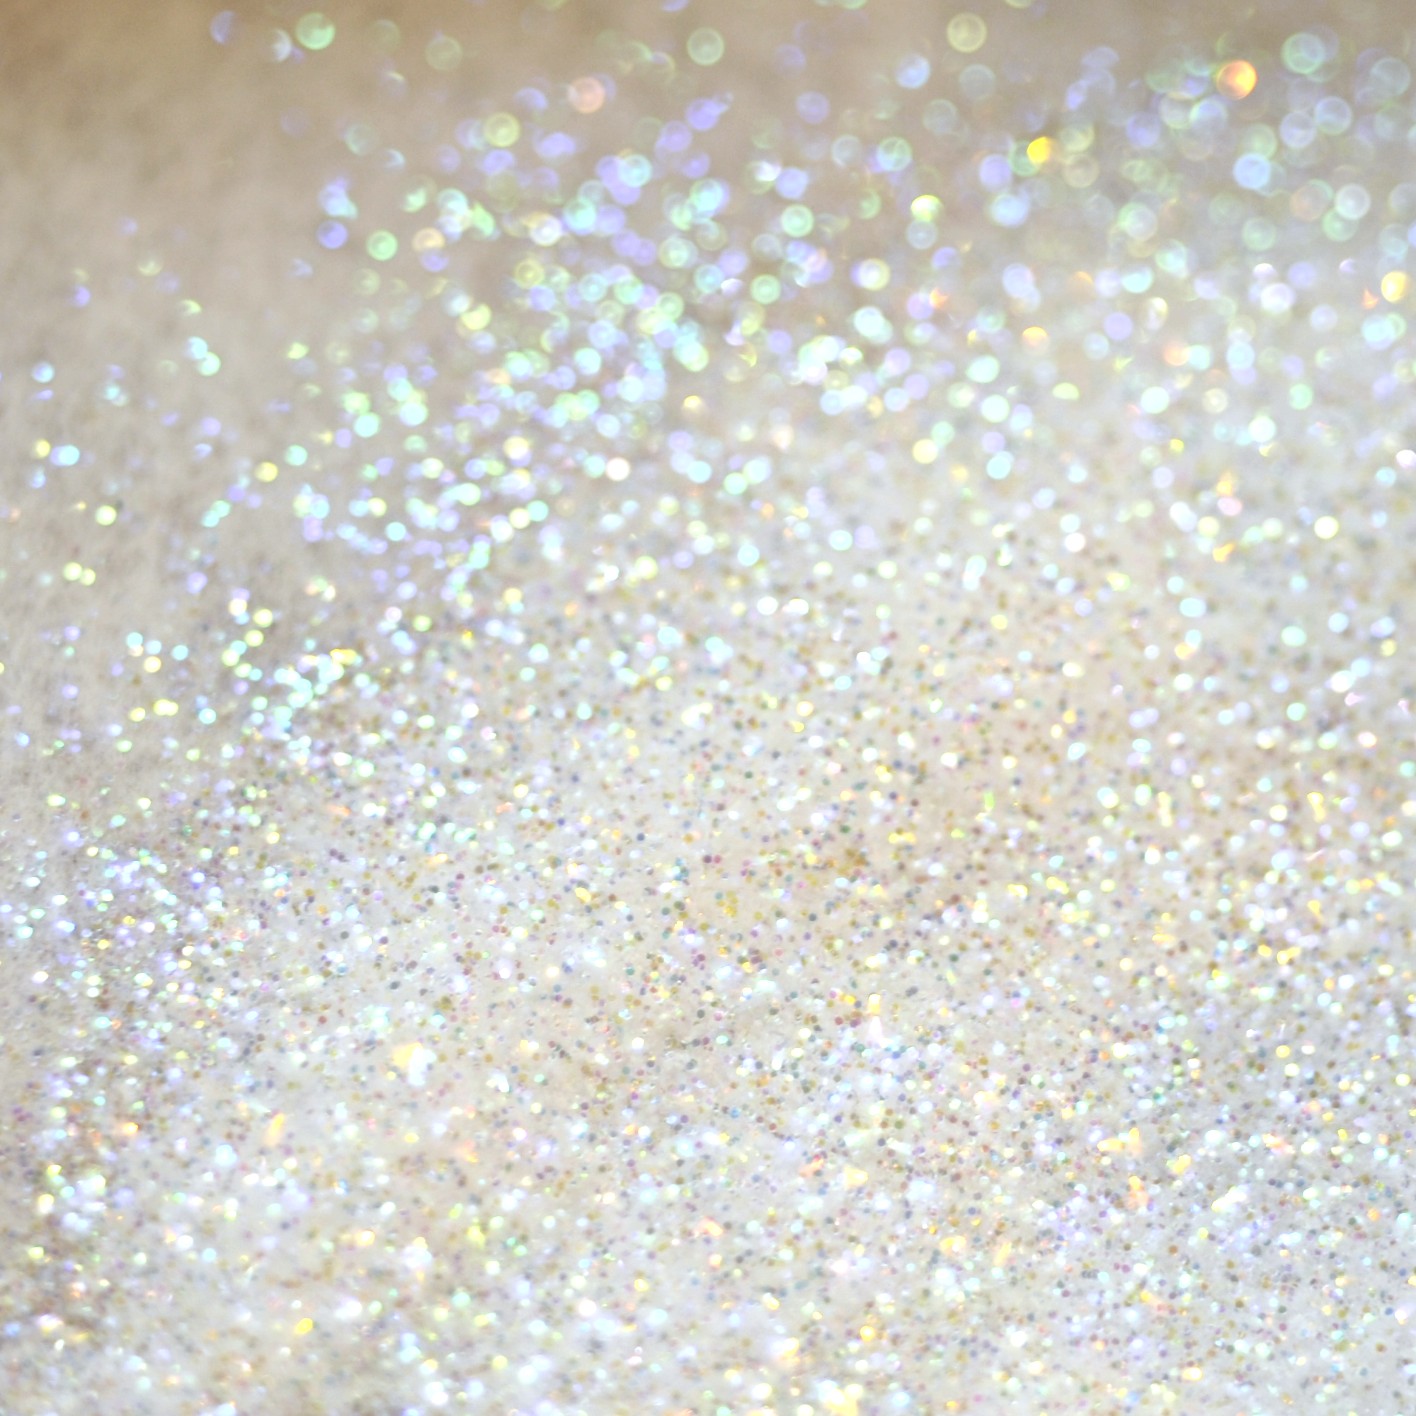  glitter background viewing images for clear glitter background